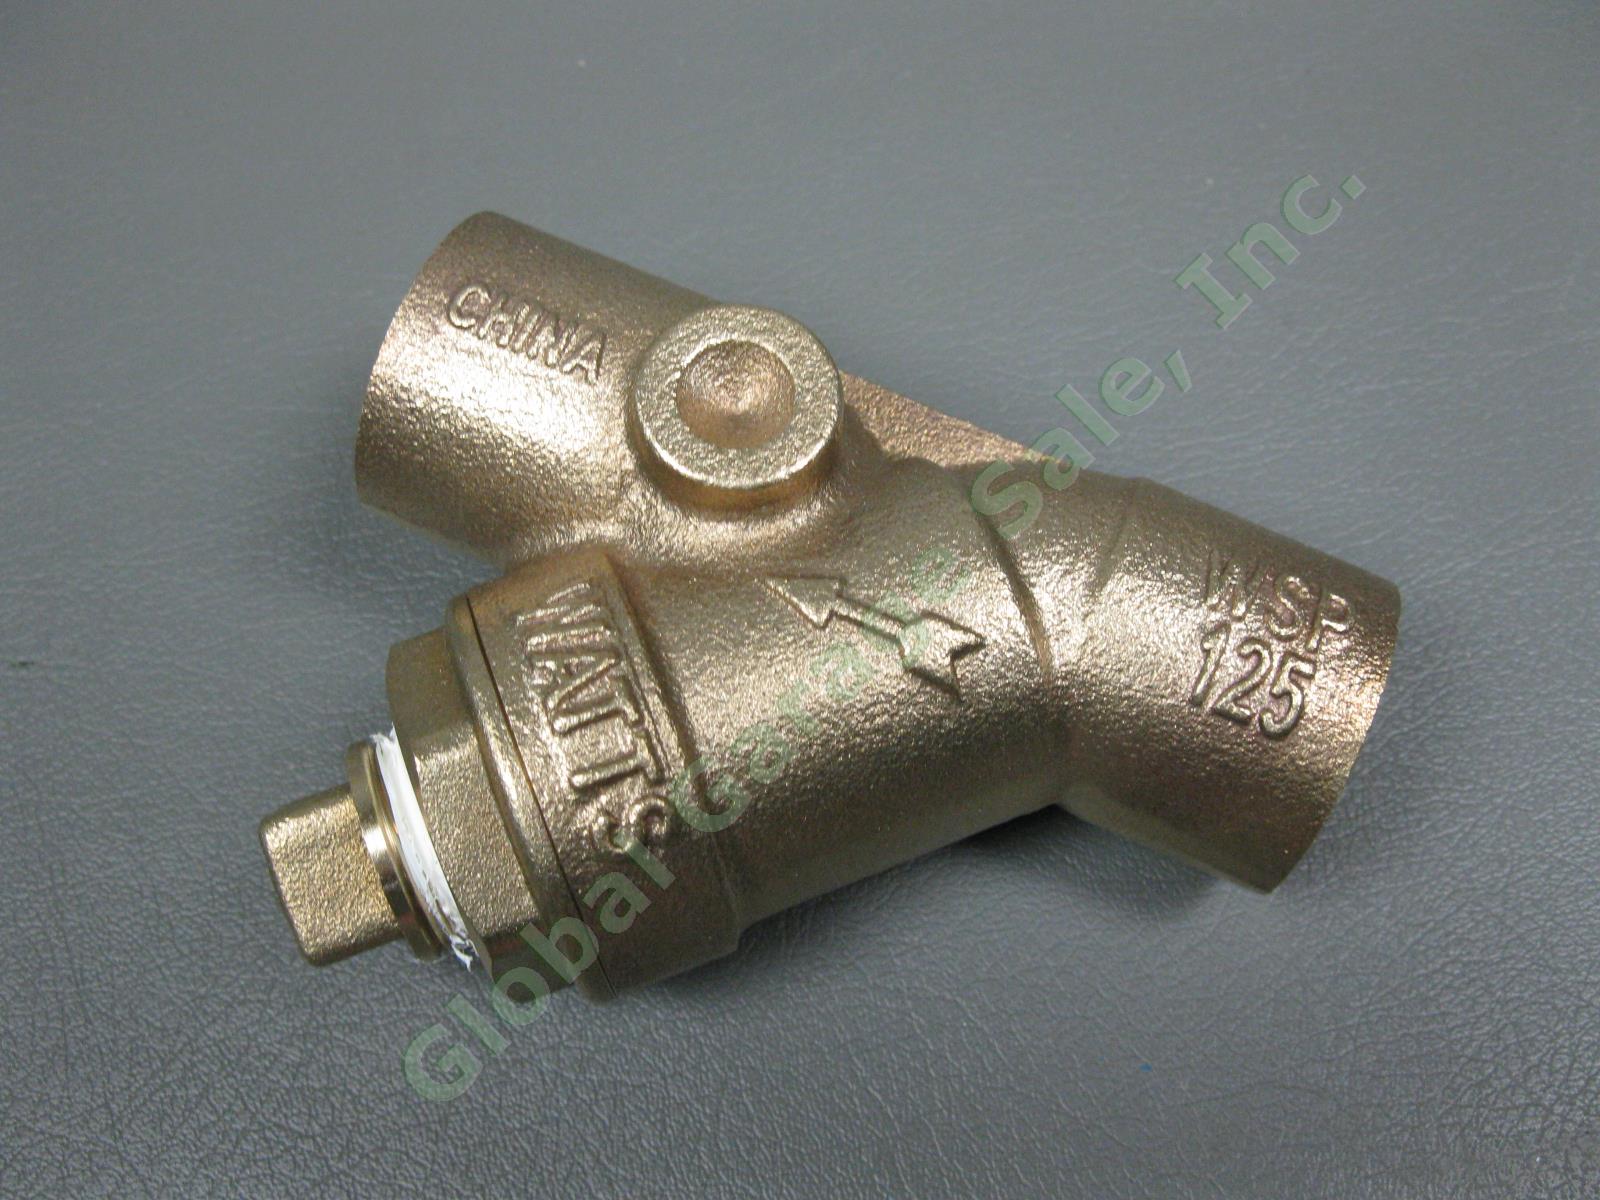 NEW Watts 1" LFS777SI Bronze Wye Strainer Lead-Free Pipe Connection Solder End 2